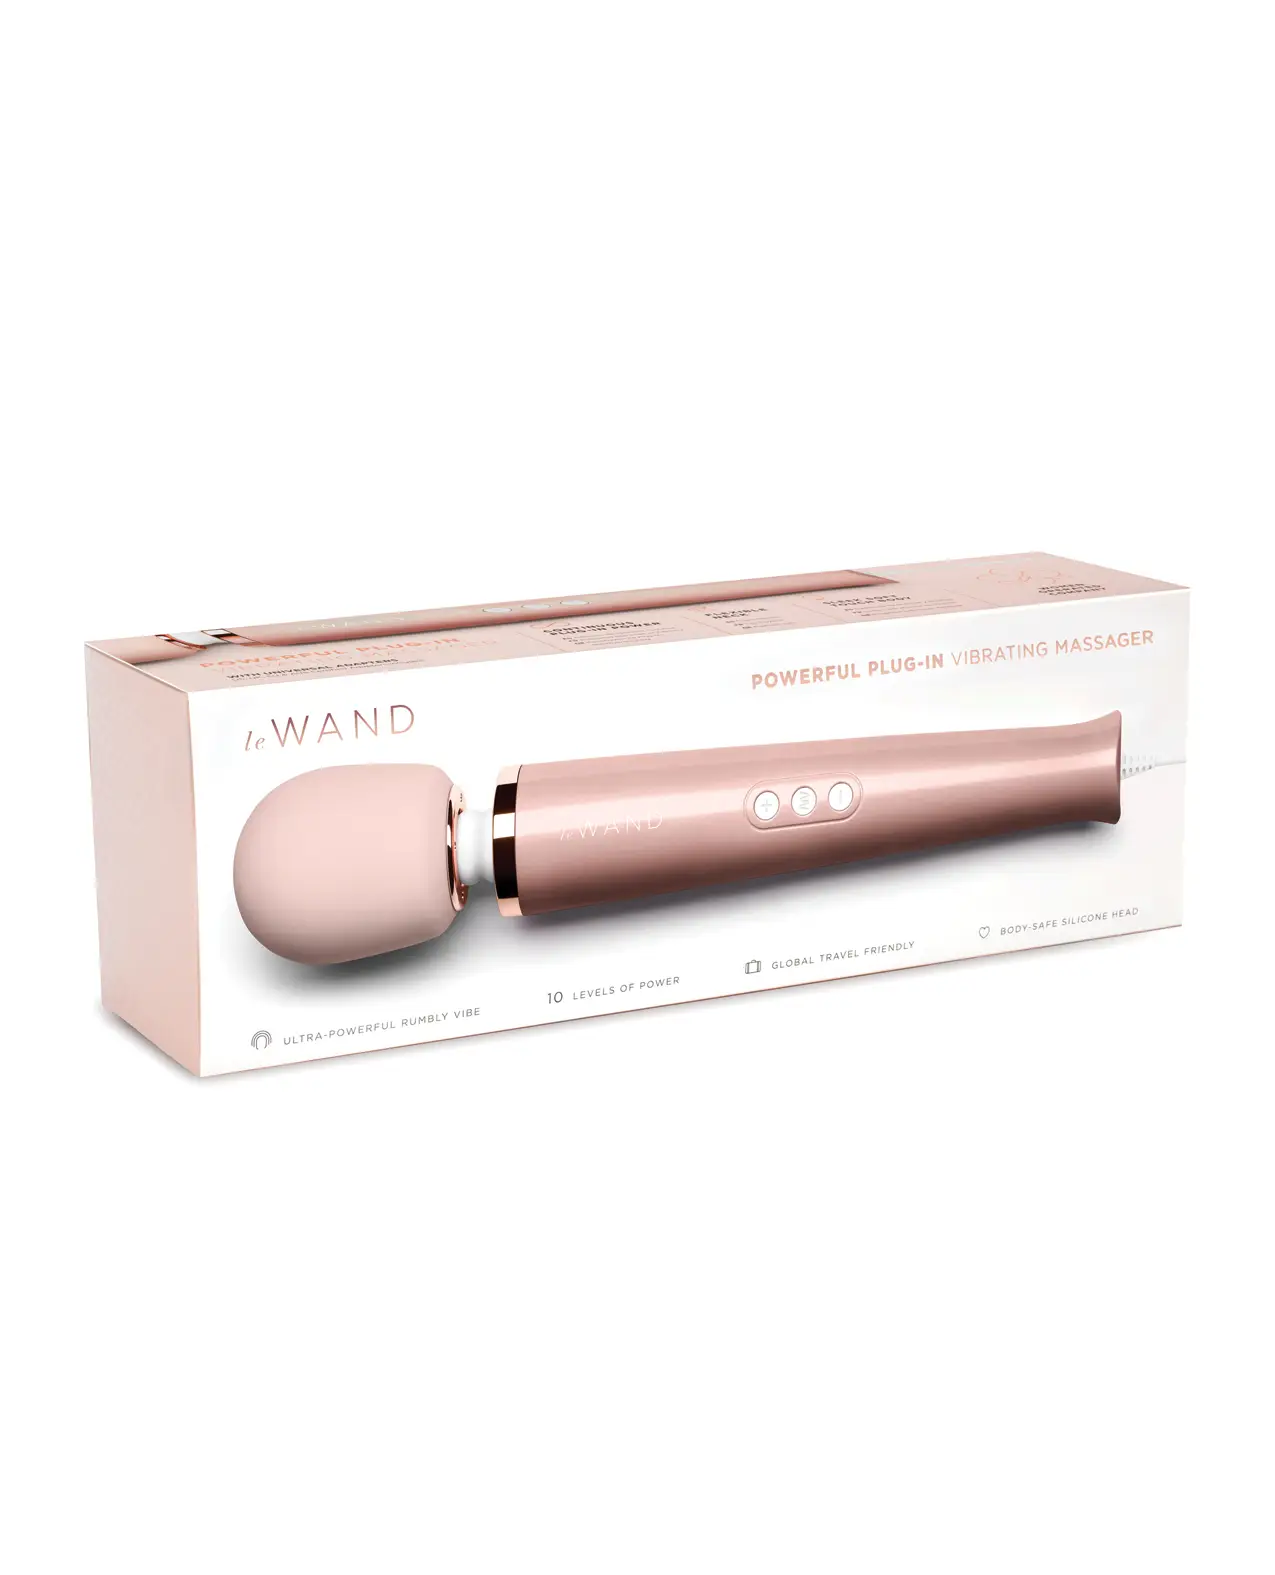 Le Wand Plug-In body massager in rose gold